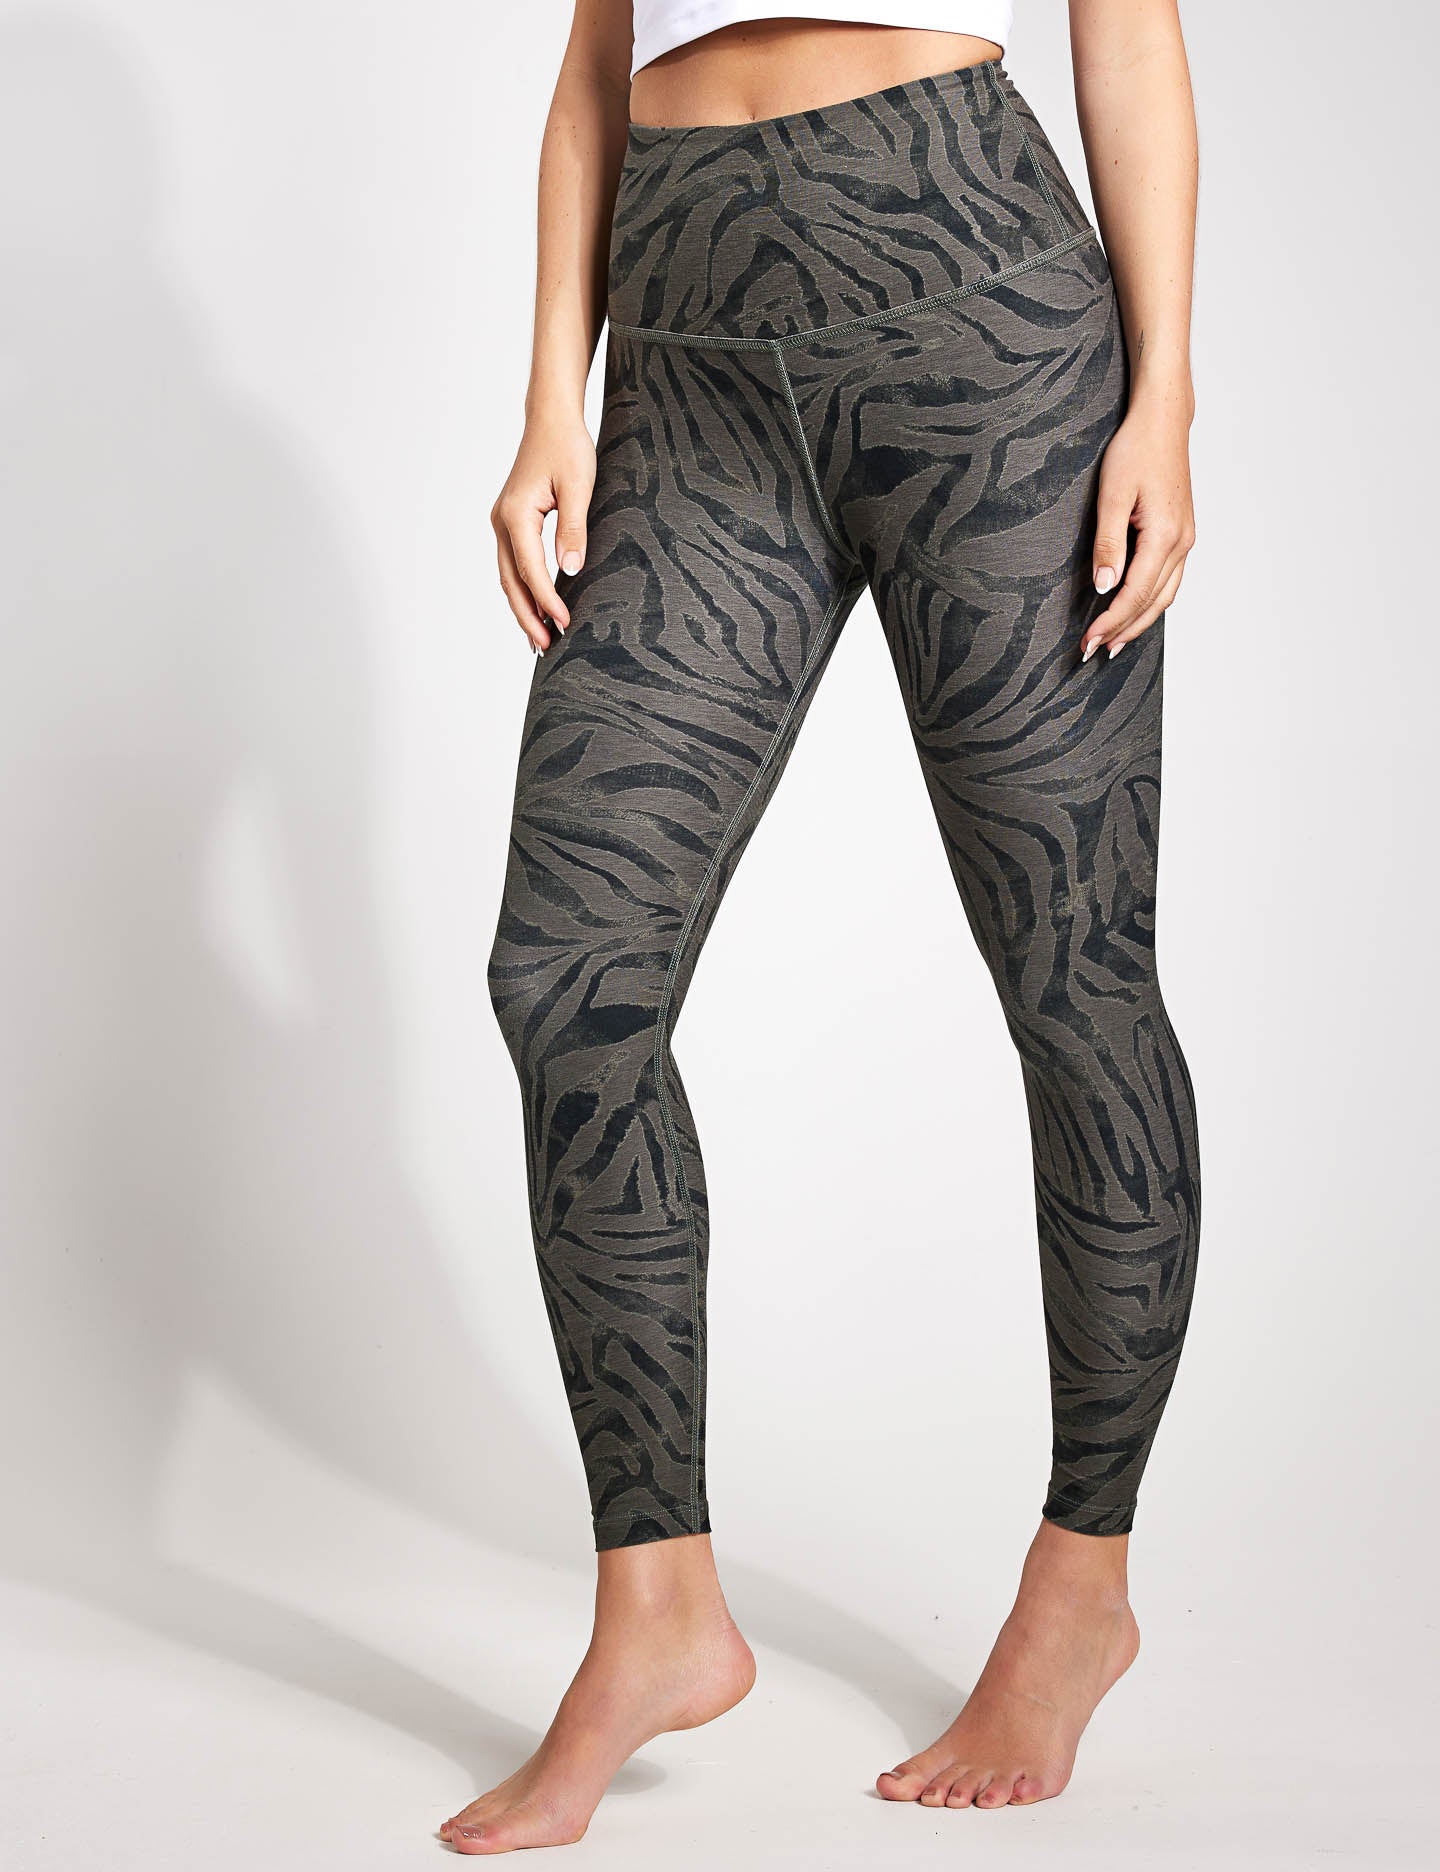 Fabletics leggings review: Do the PowerHold leggings live up to